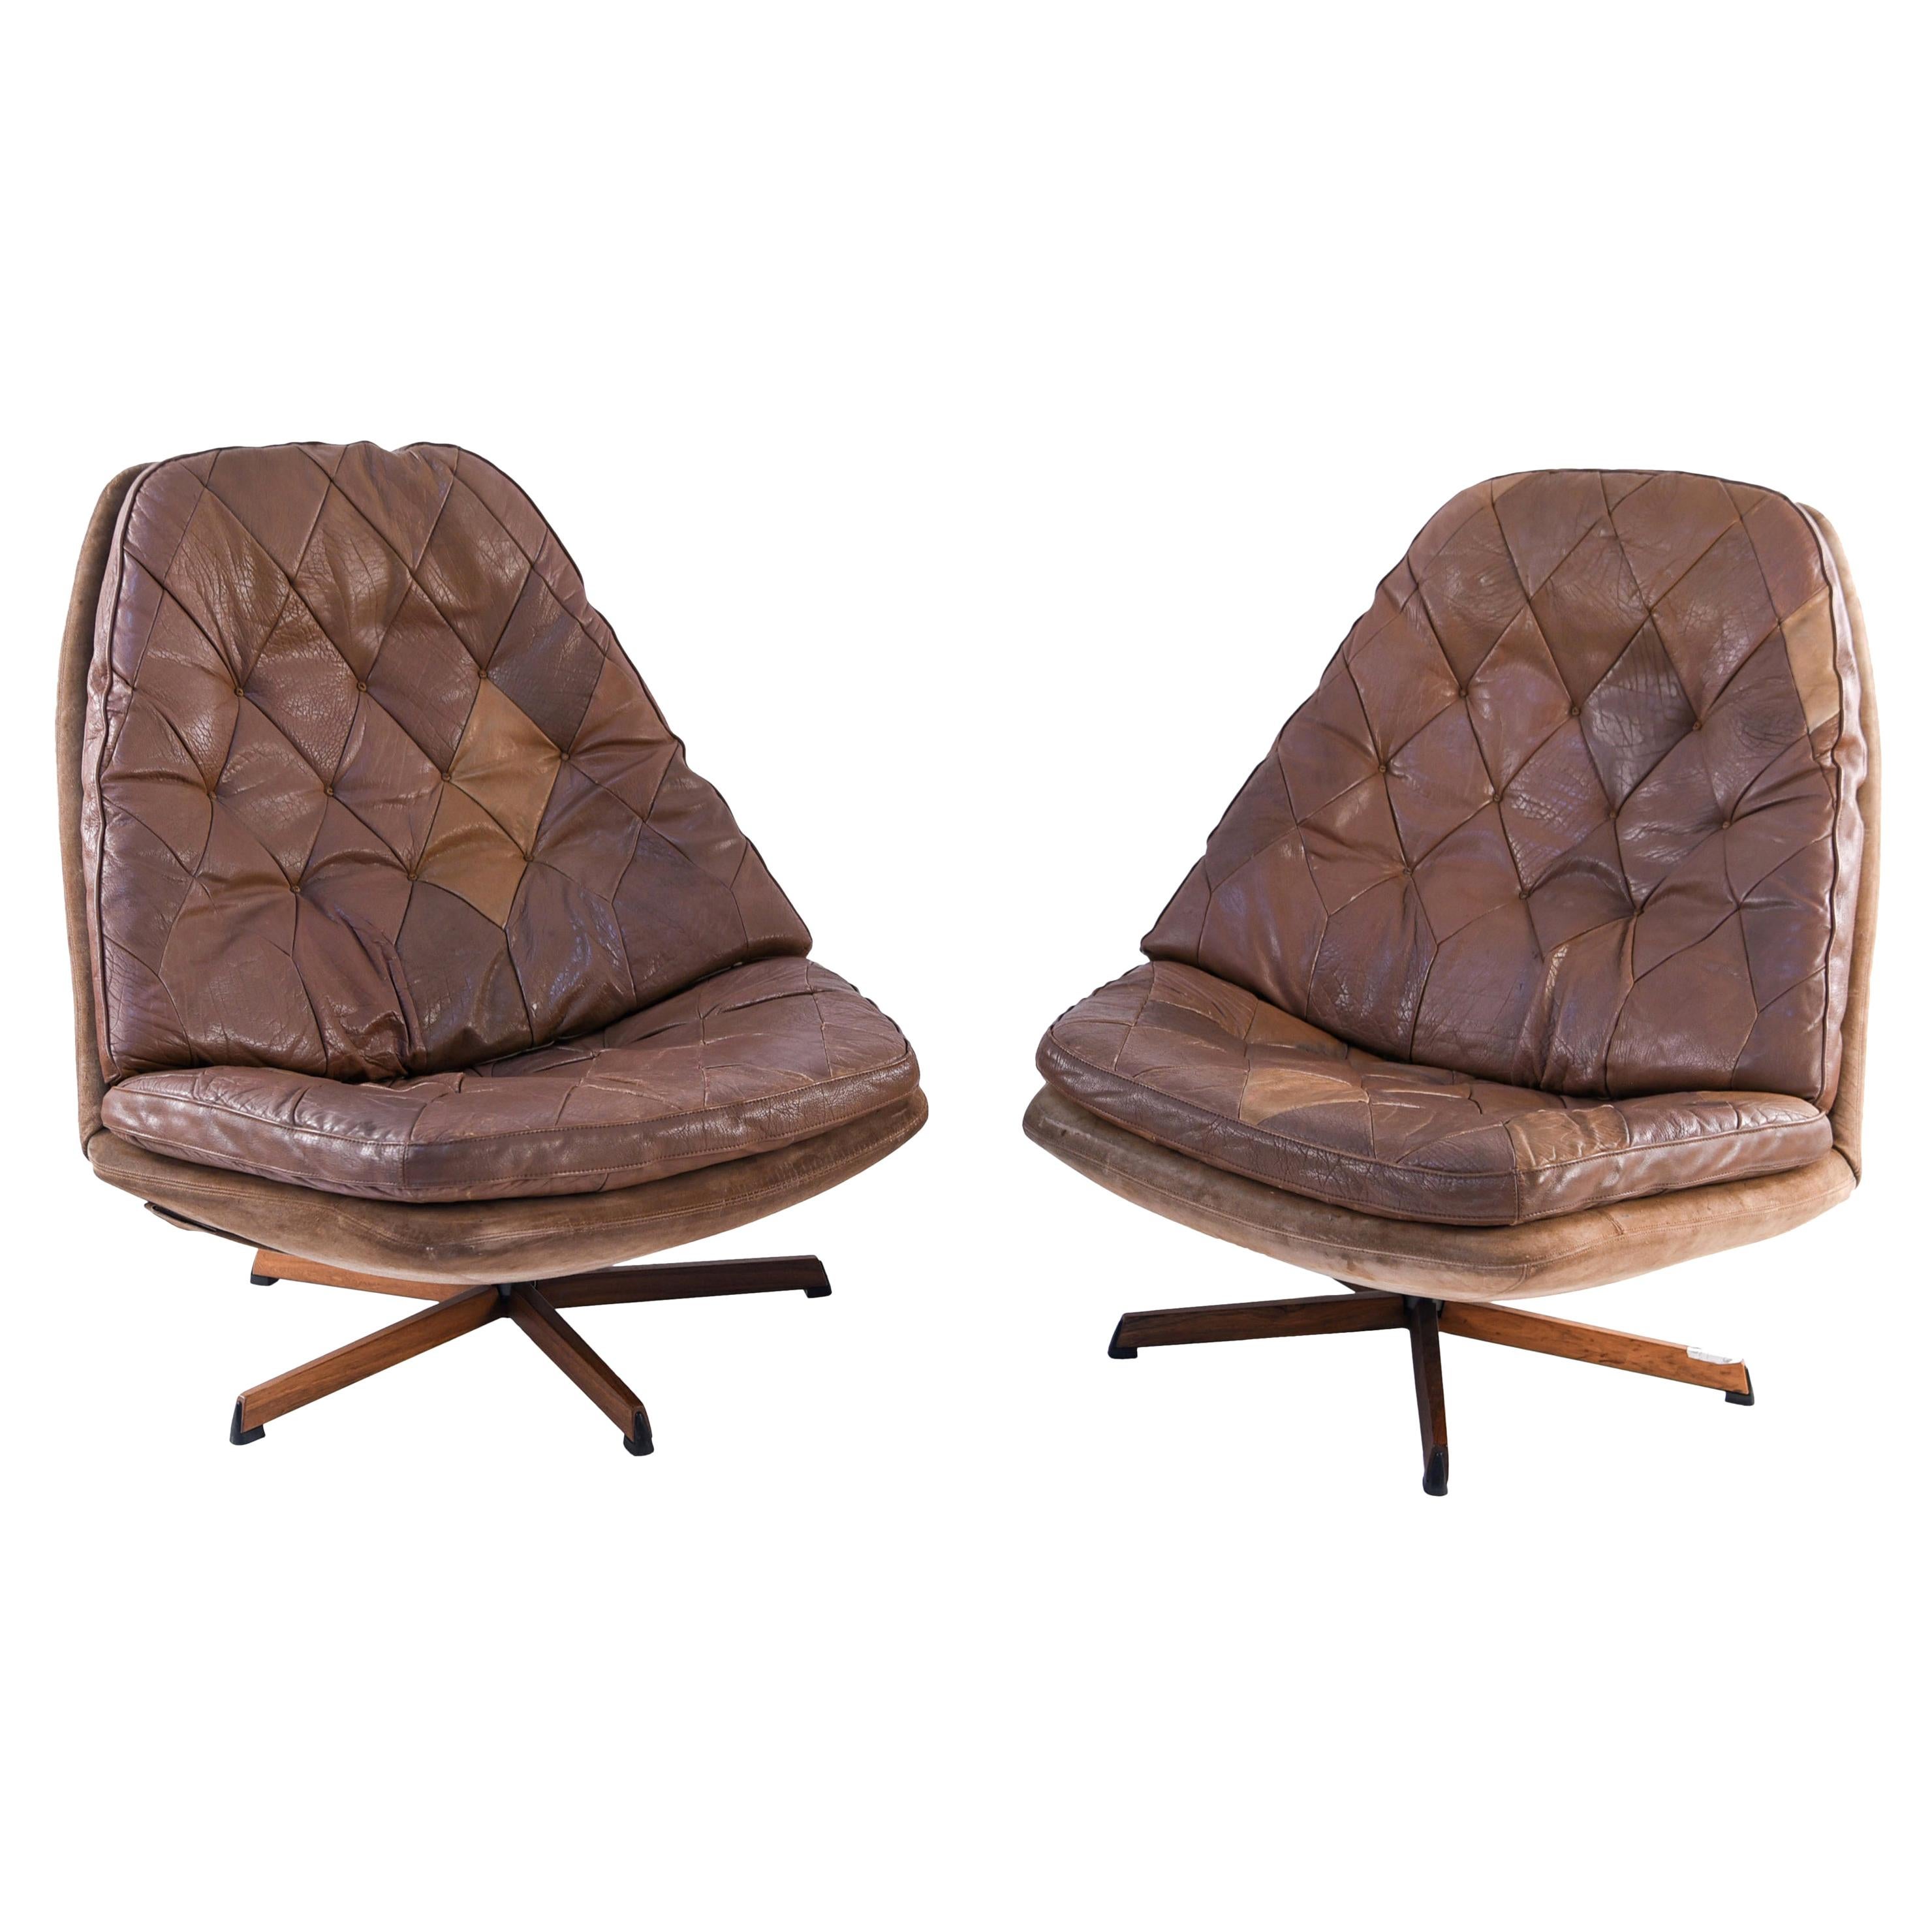 Pair of Madsen and Schubell Leather Upholstered Danish Swivel Chairs